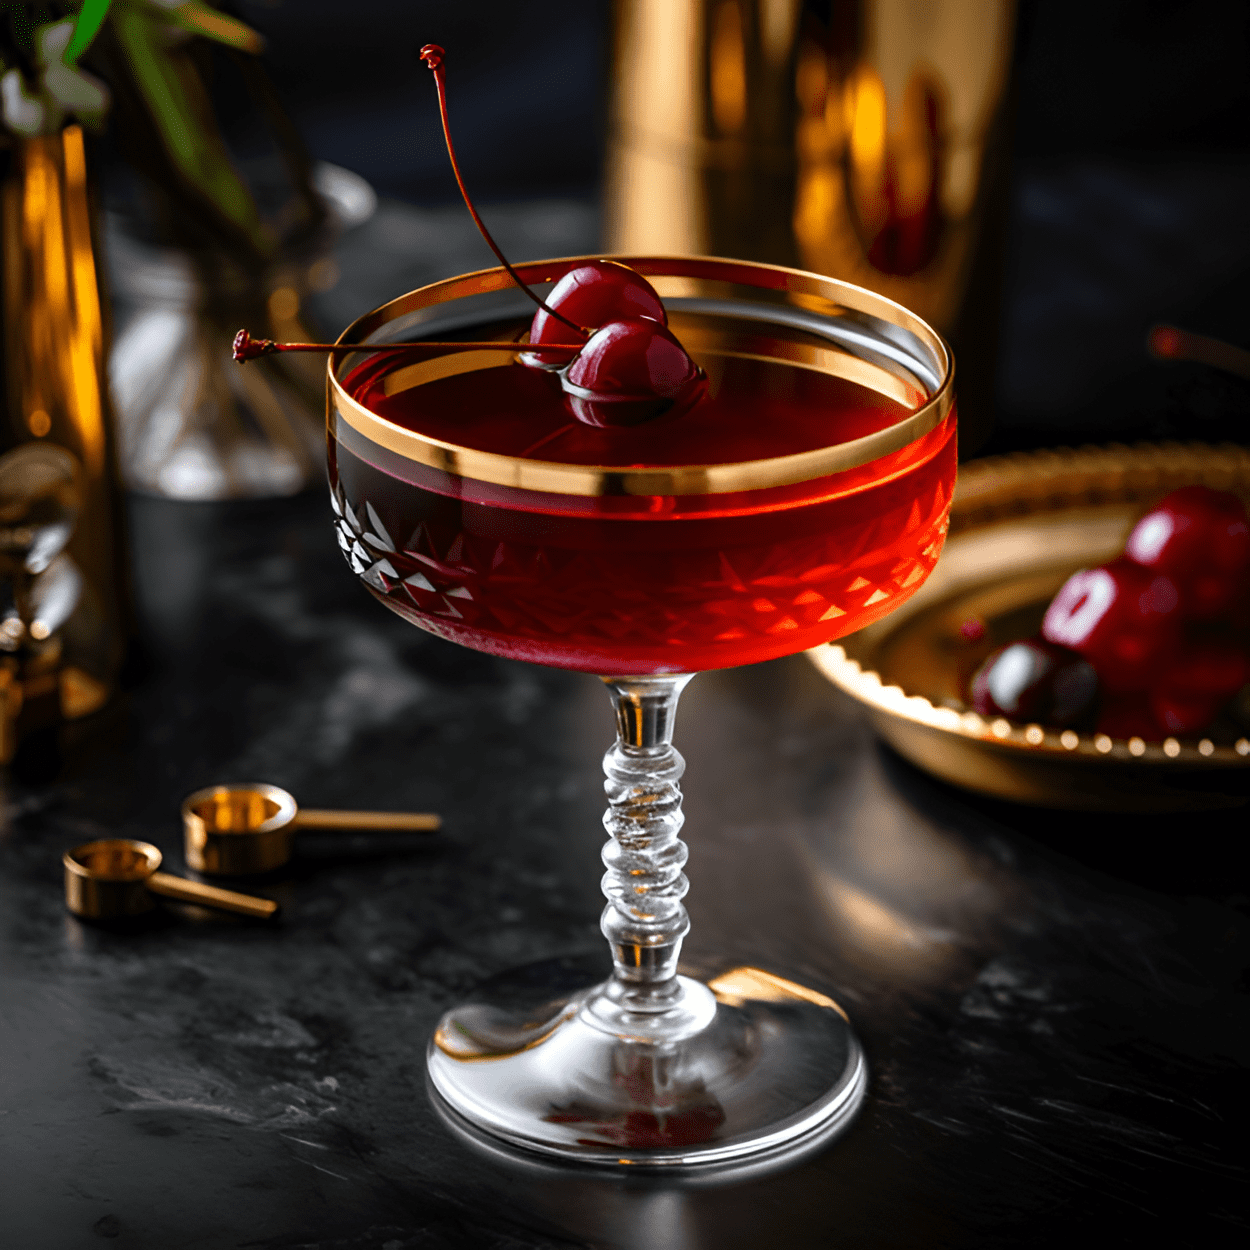 Maddress Cocktail Recipe - The Maddress cocktail is a robust and potent drink, with the strong, smoky flavor of whiskey perfectly balanced by the sweet, fruity notes of cherry brandy and vermouth. It's a complex cocktail that leaves a lingering, warm aftertaste.